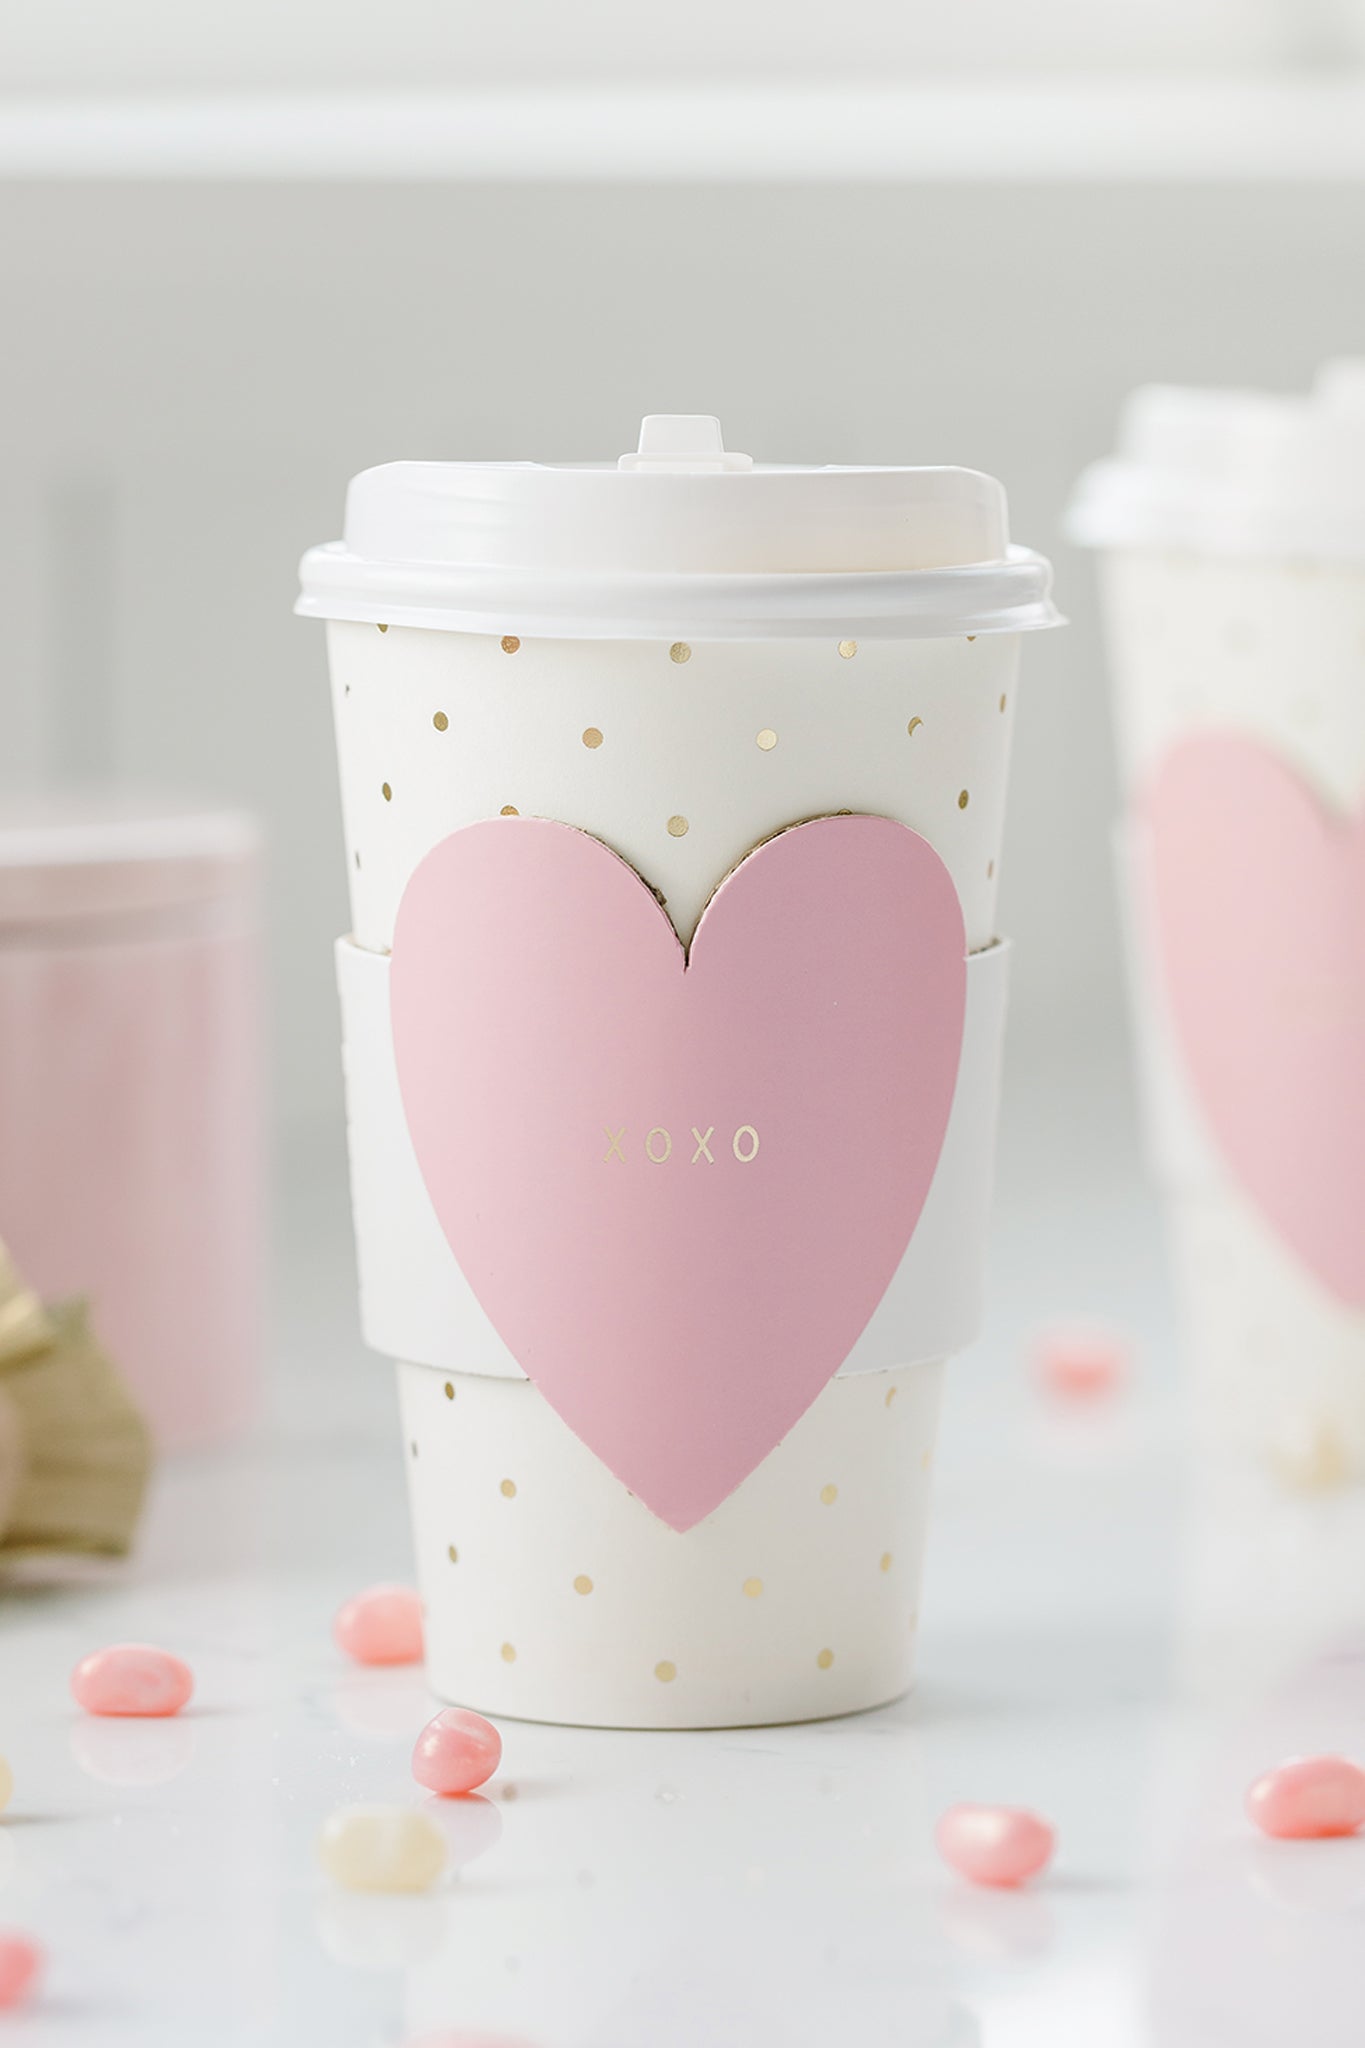 PLTG156 - Pink XOXO Heart Cozy To-Go Cups (8 ct)